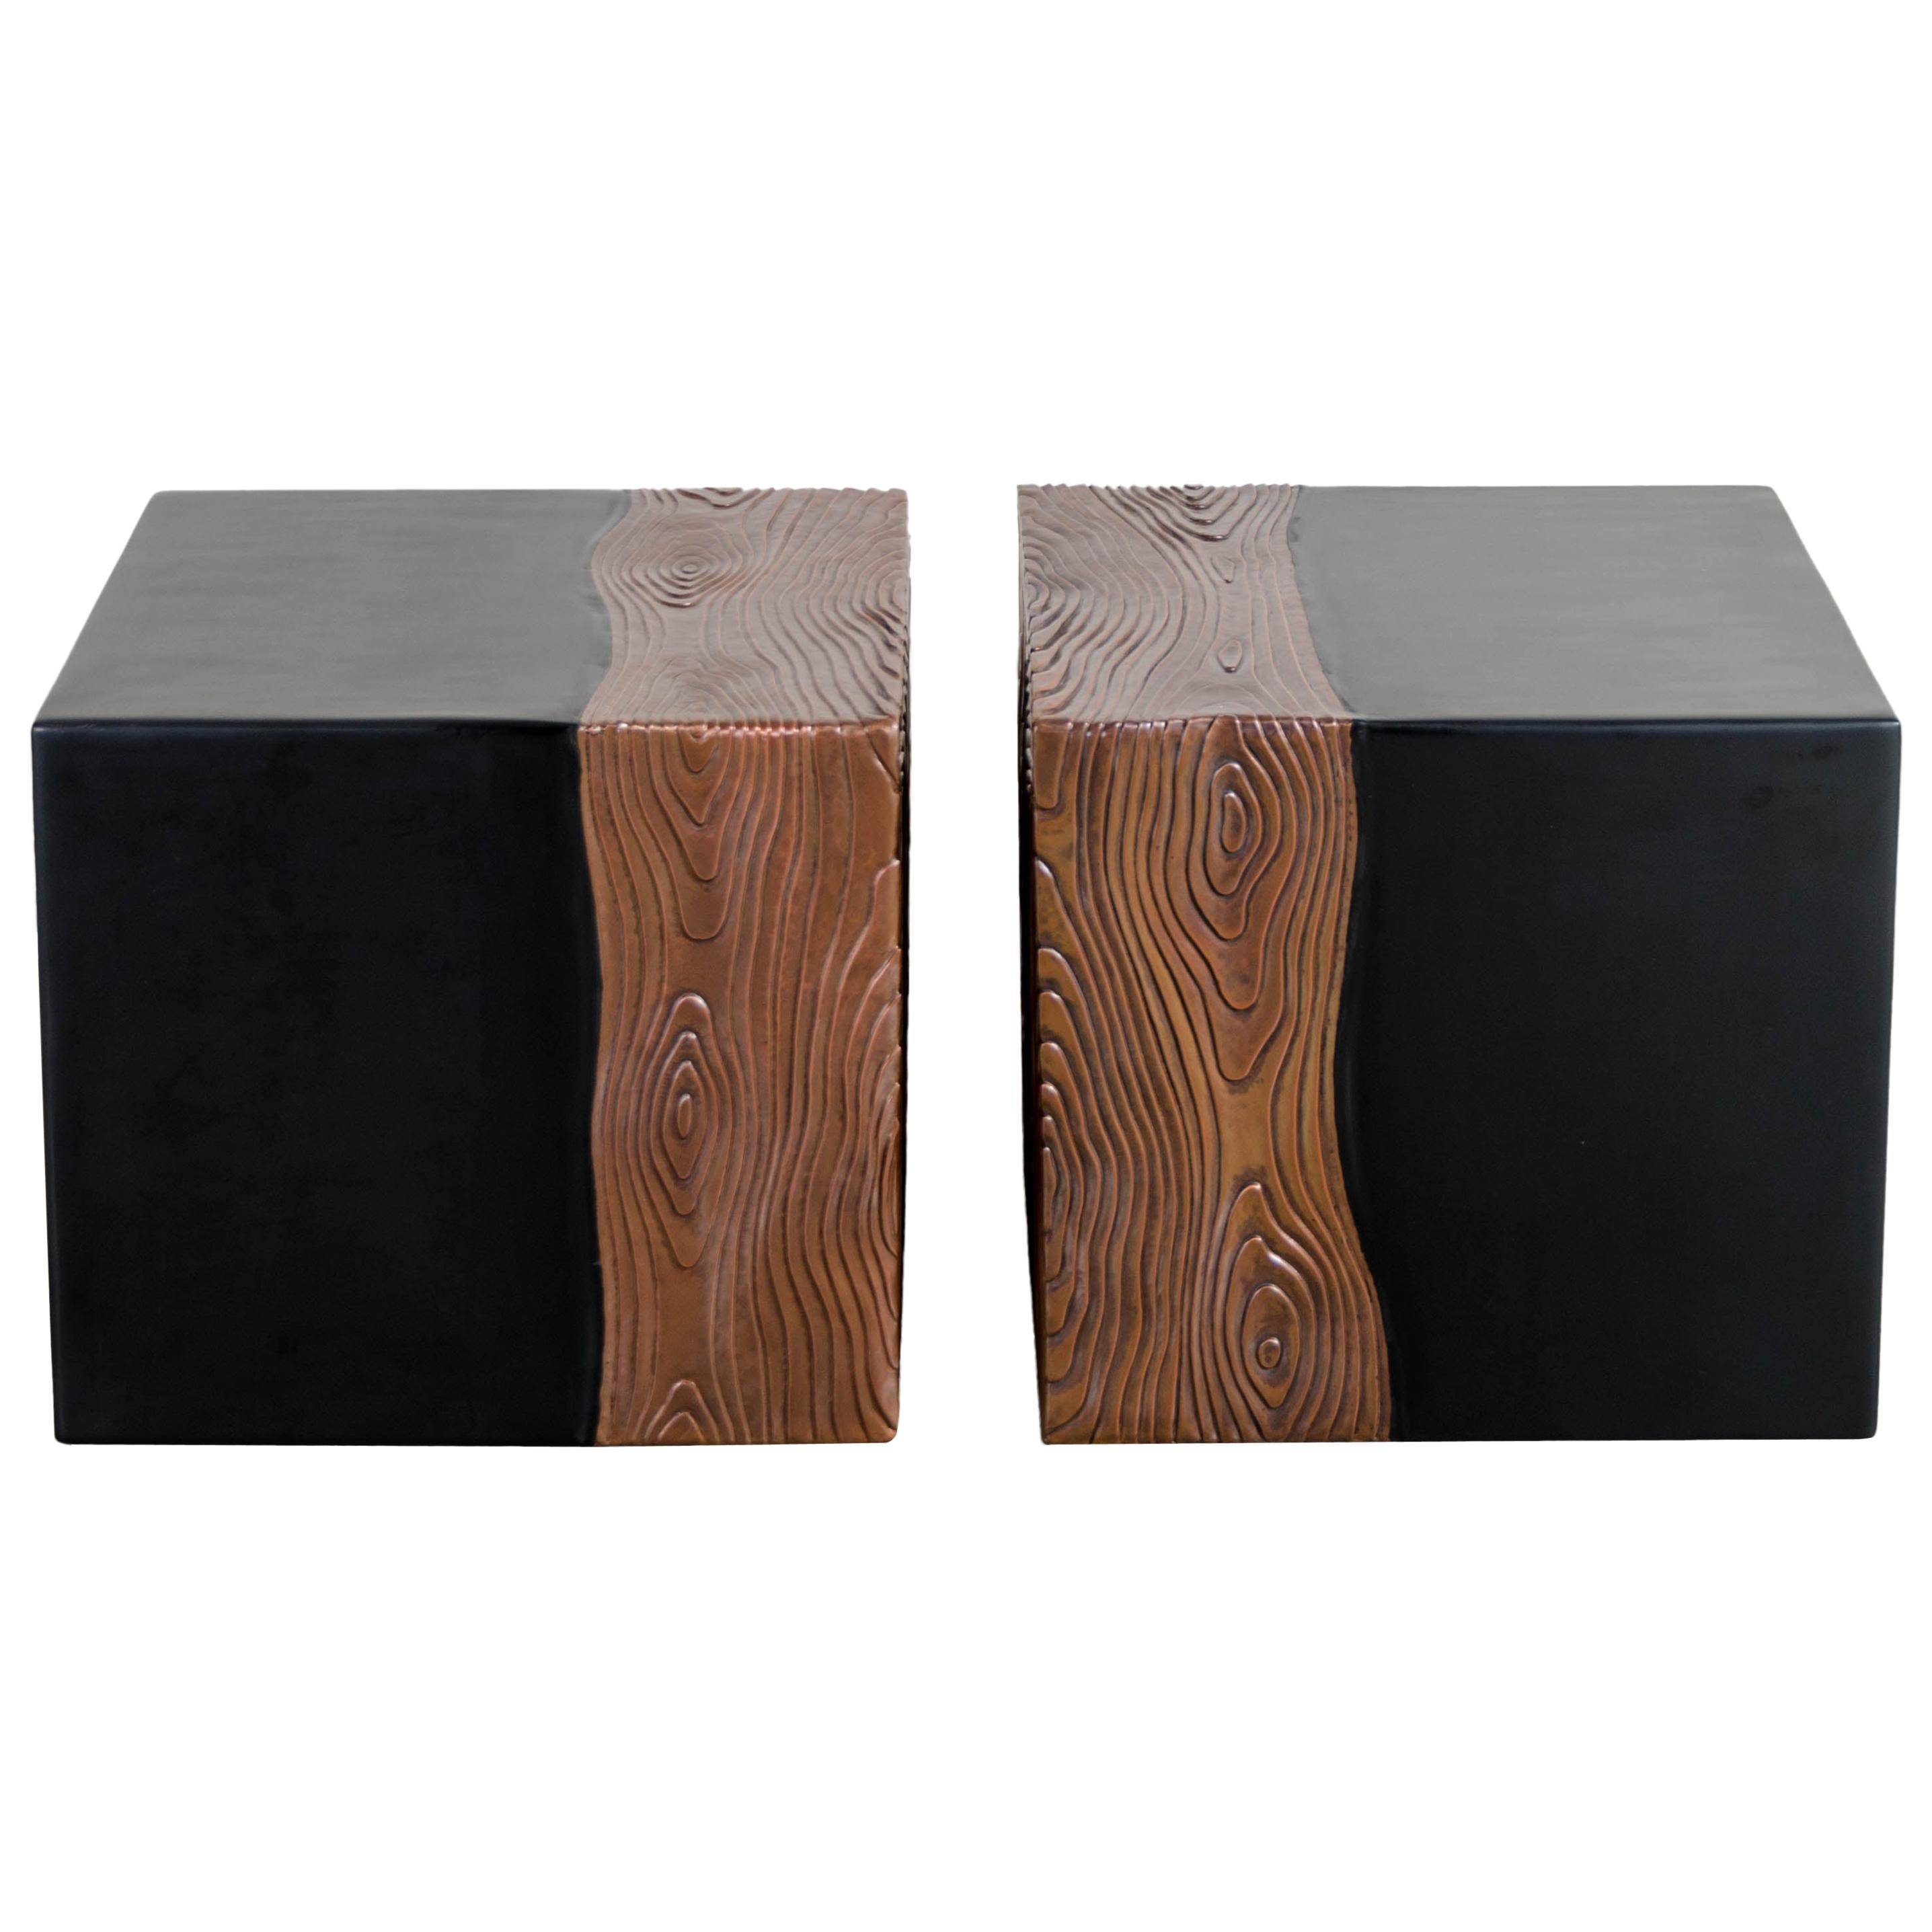 Square Seat with Woodgrain Design, Black Lacquer, Copper, Set of 2 by Robert Kuo